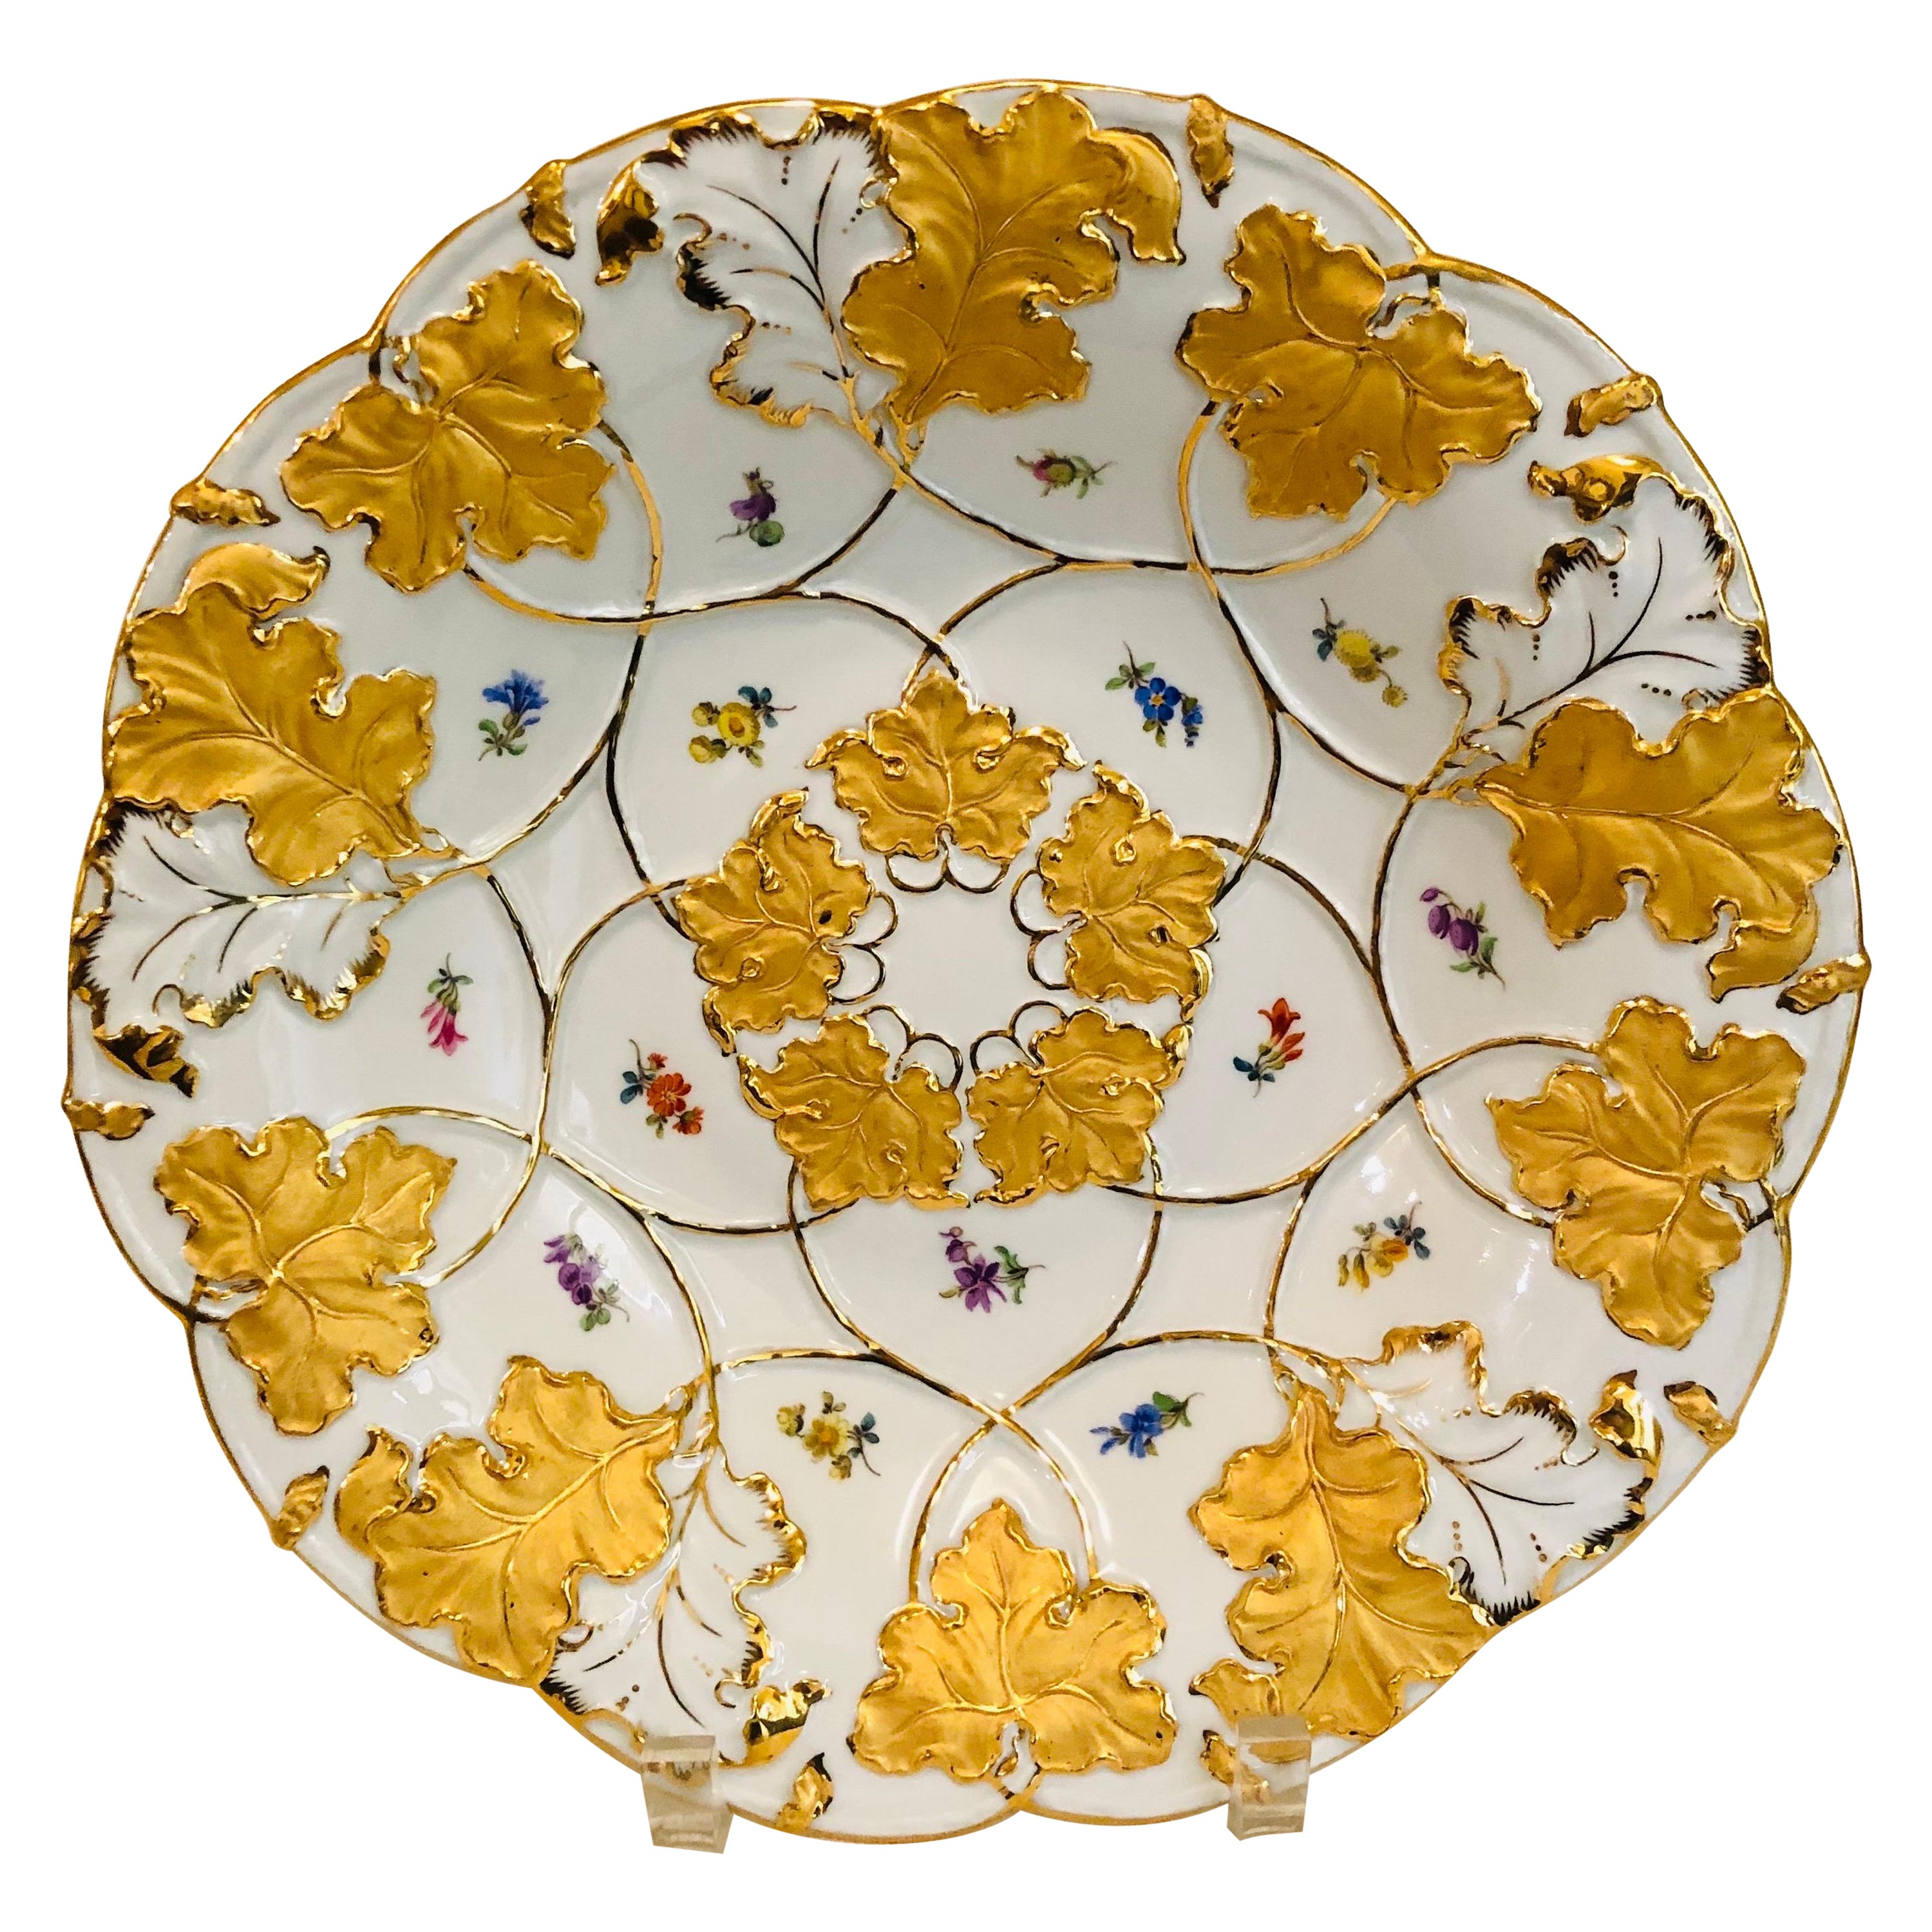 Meissen Charger Painted with Gilded Acanthus Leaves and Multicolored Flowers